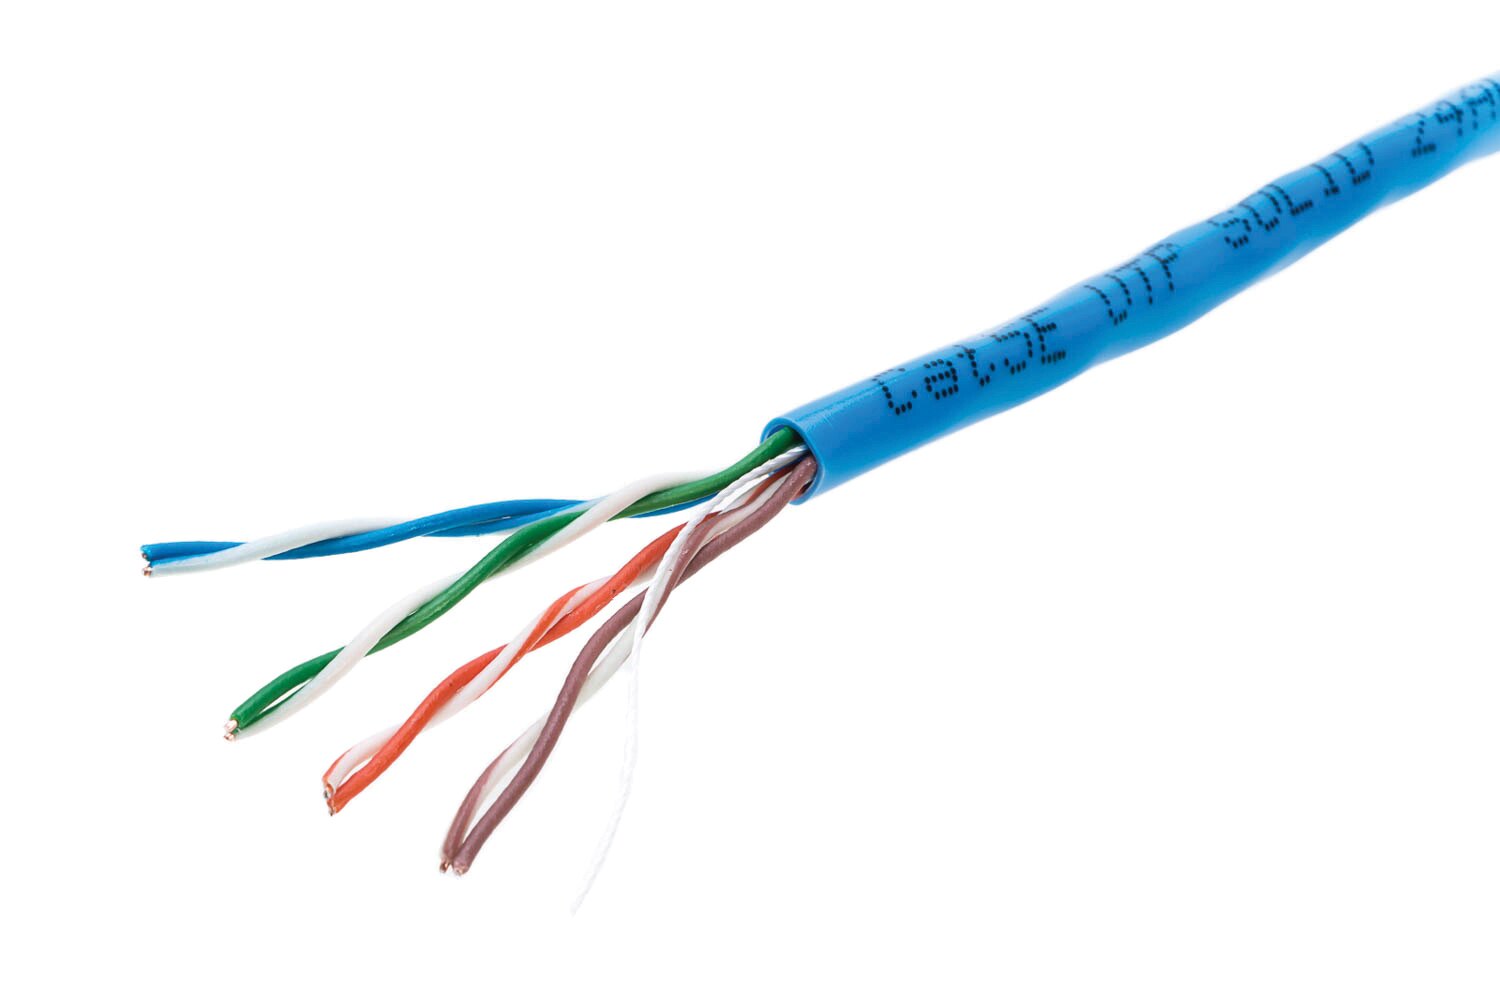 I have a fiber connection, what should I know about the internal cabling